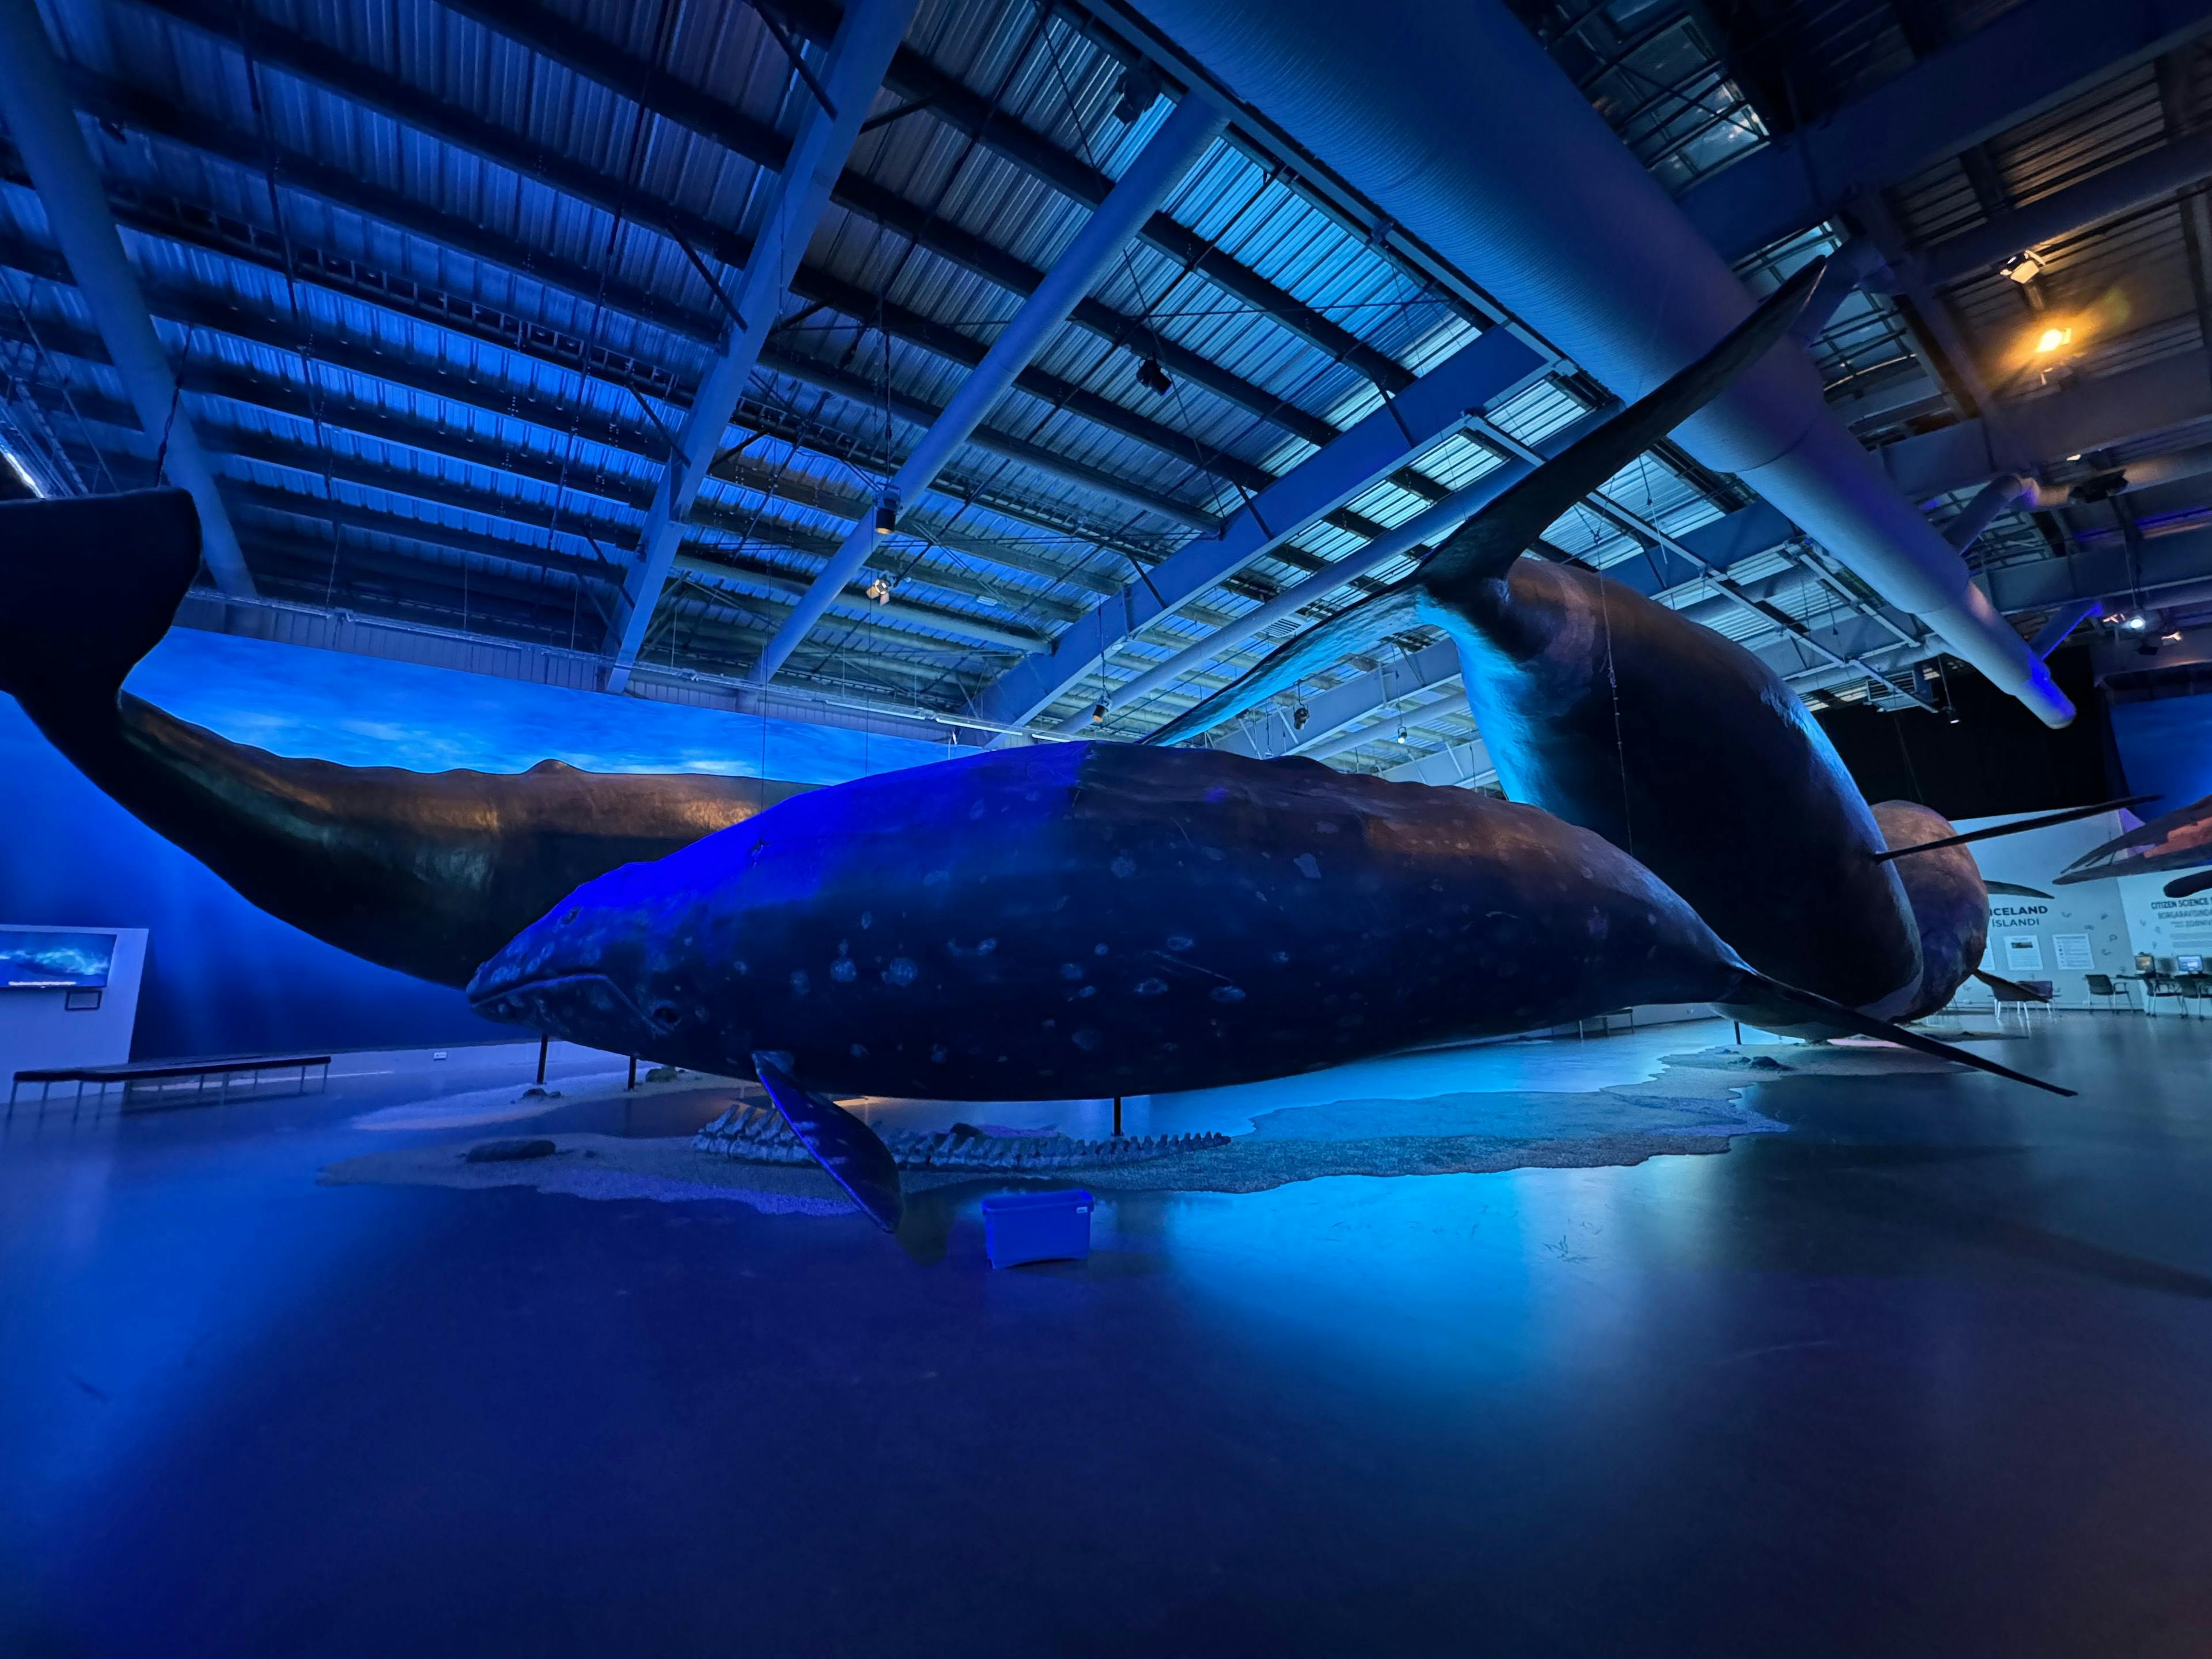 Whales of Iceland Museum, A Journey into the Majestic World of Whales